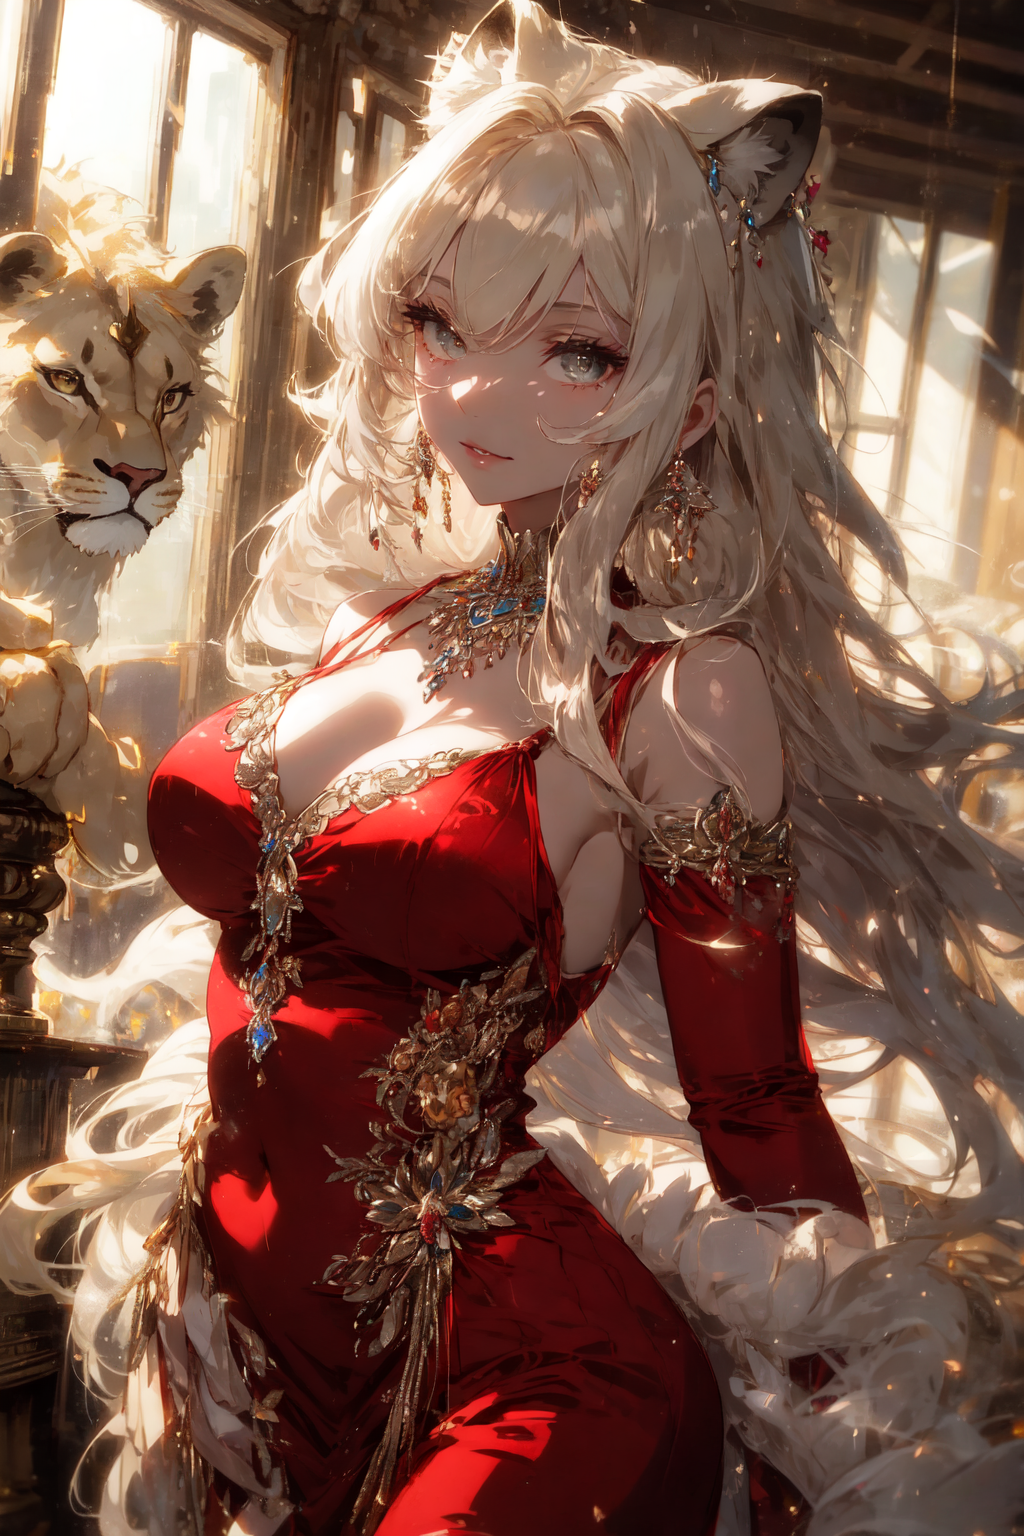 Leo's Gaze: Captivating AI Anime Girl Character Artistry by Diki